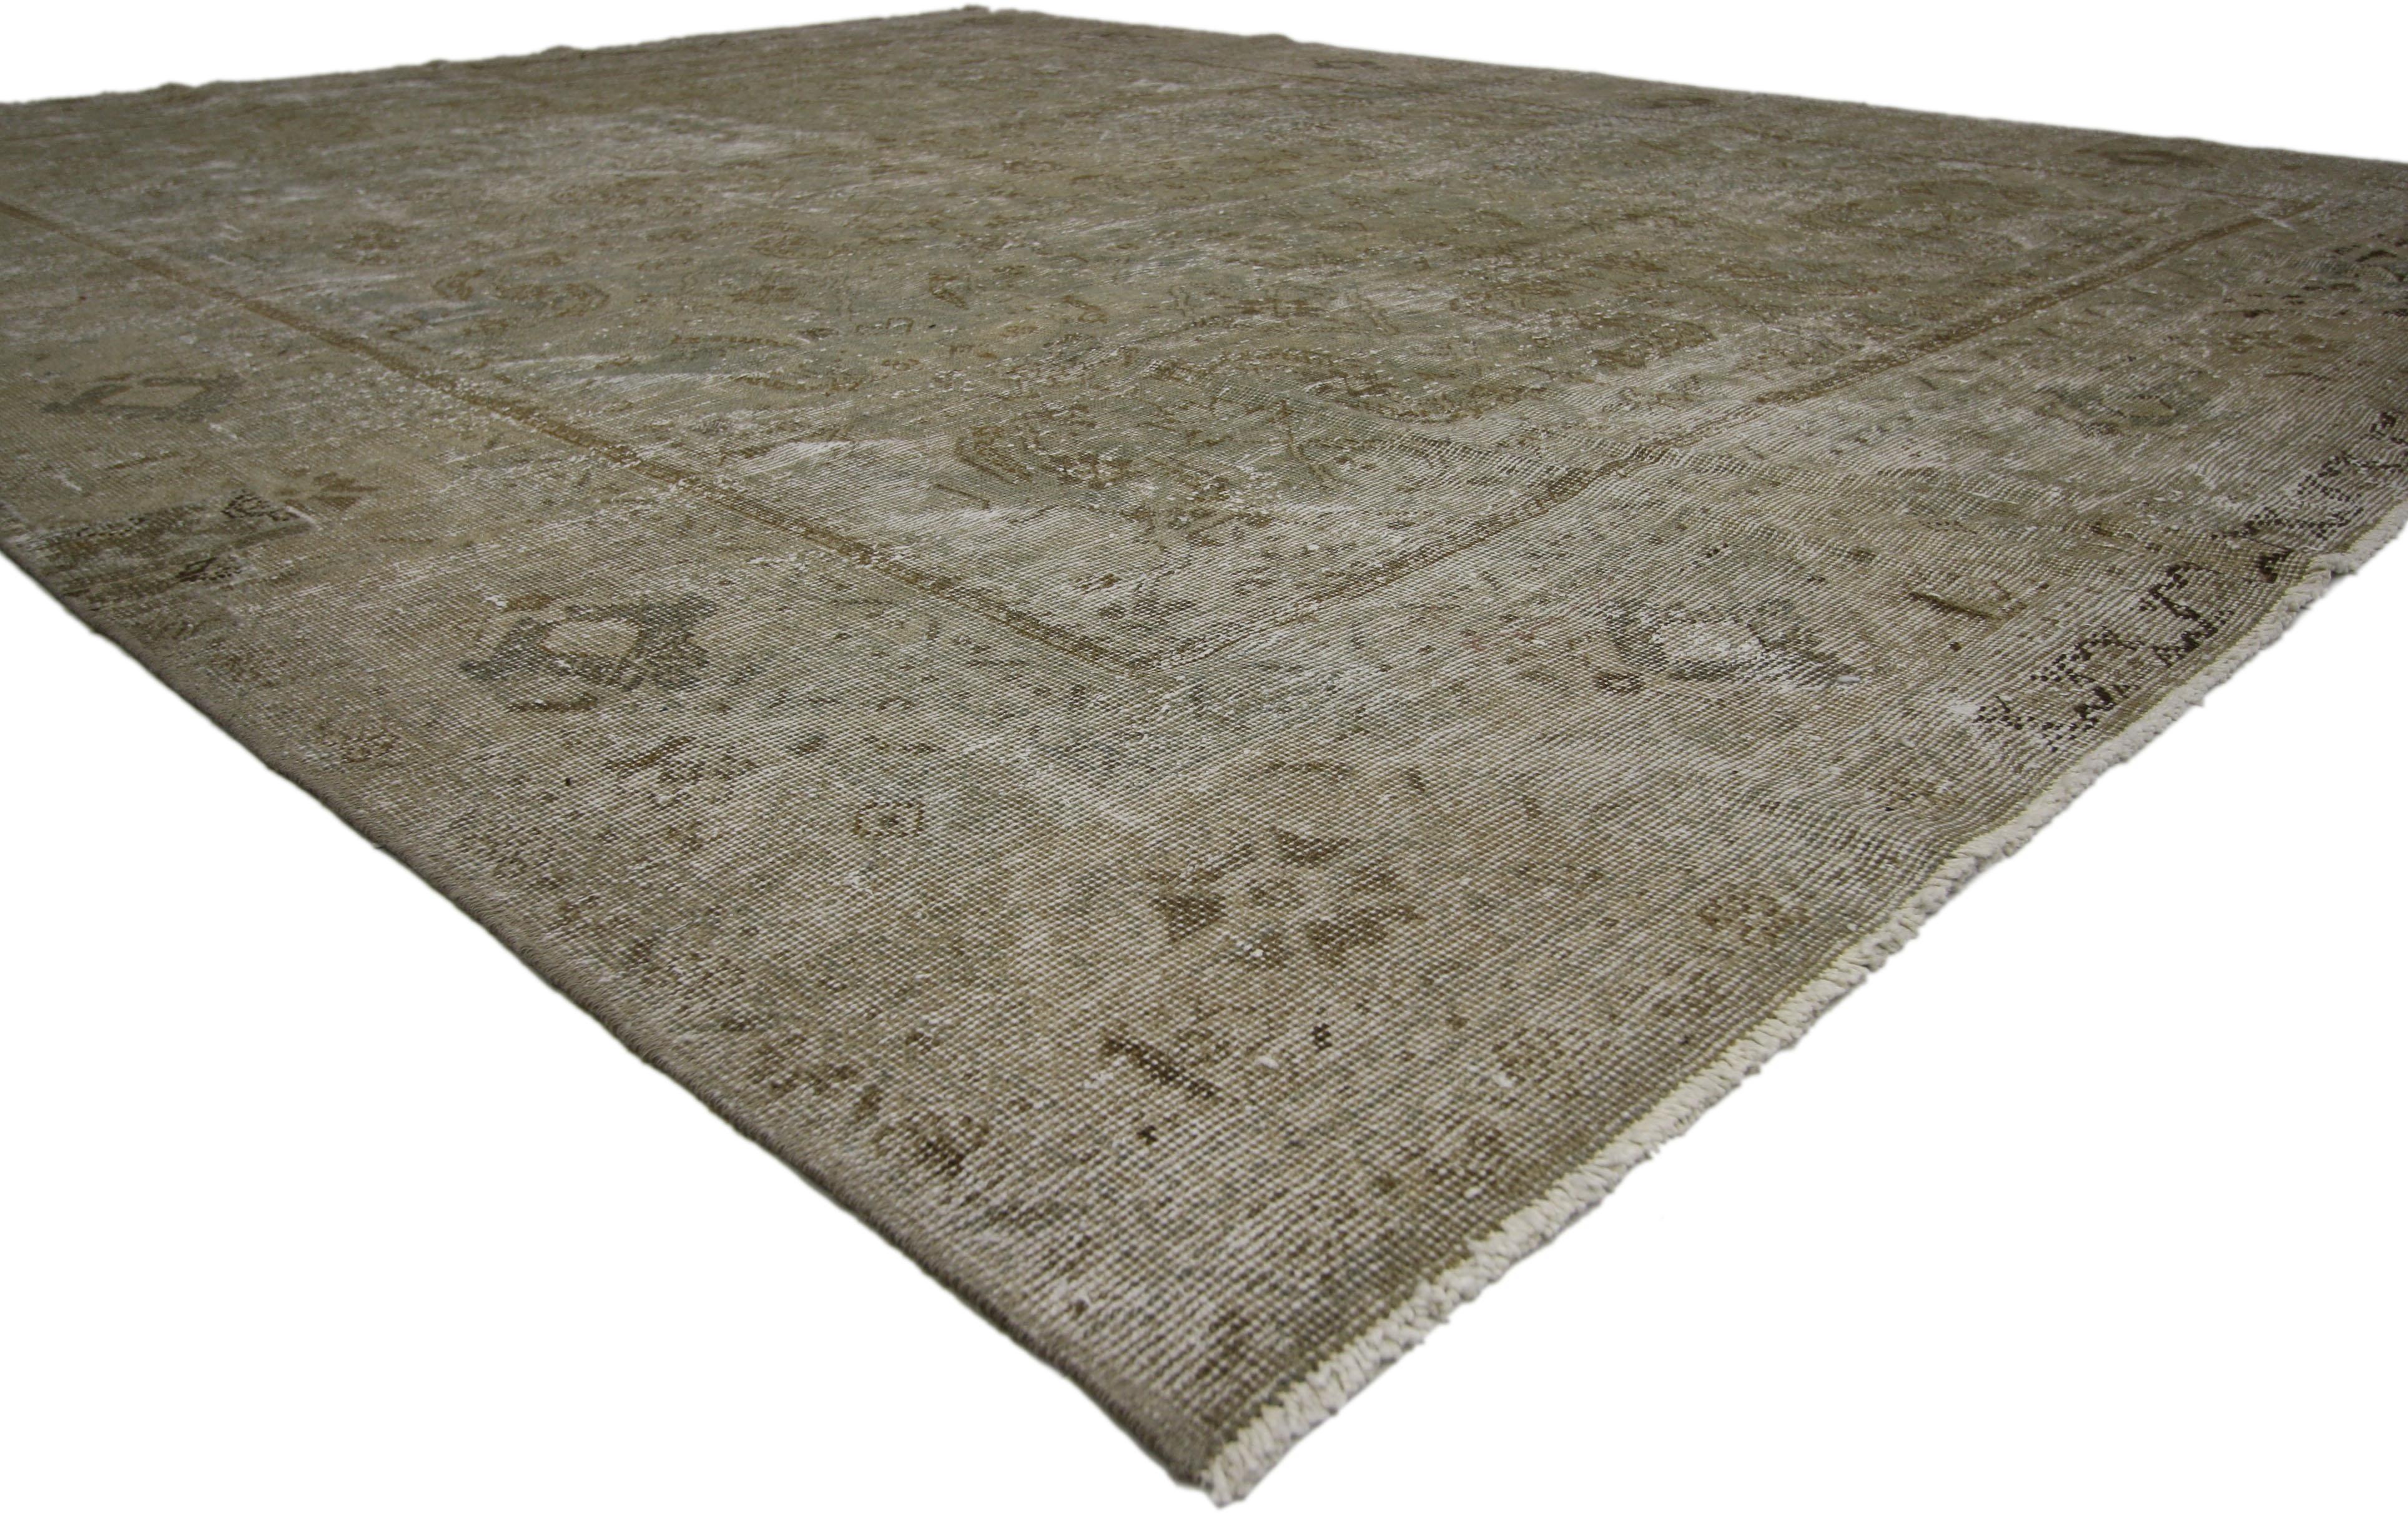 60672, distressed vintage Turkish rug with Modern Industrial style. Defined and raw combined with utilitarian appeal, this distressed vintage Turkish rug goes beyond the boundaries of design with historical richness and a subtle burst of dark and